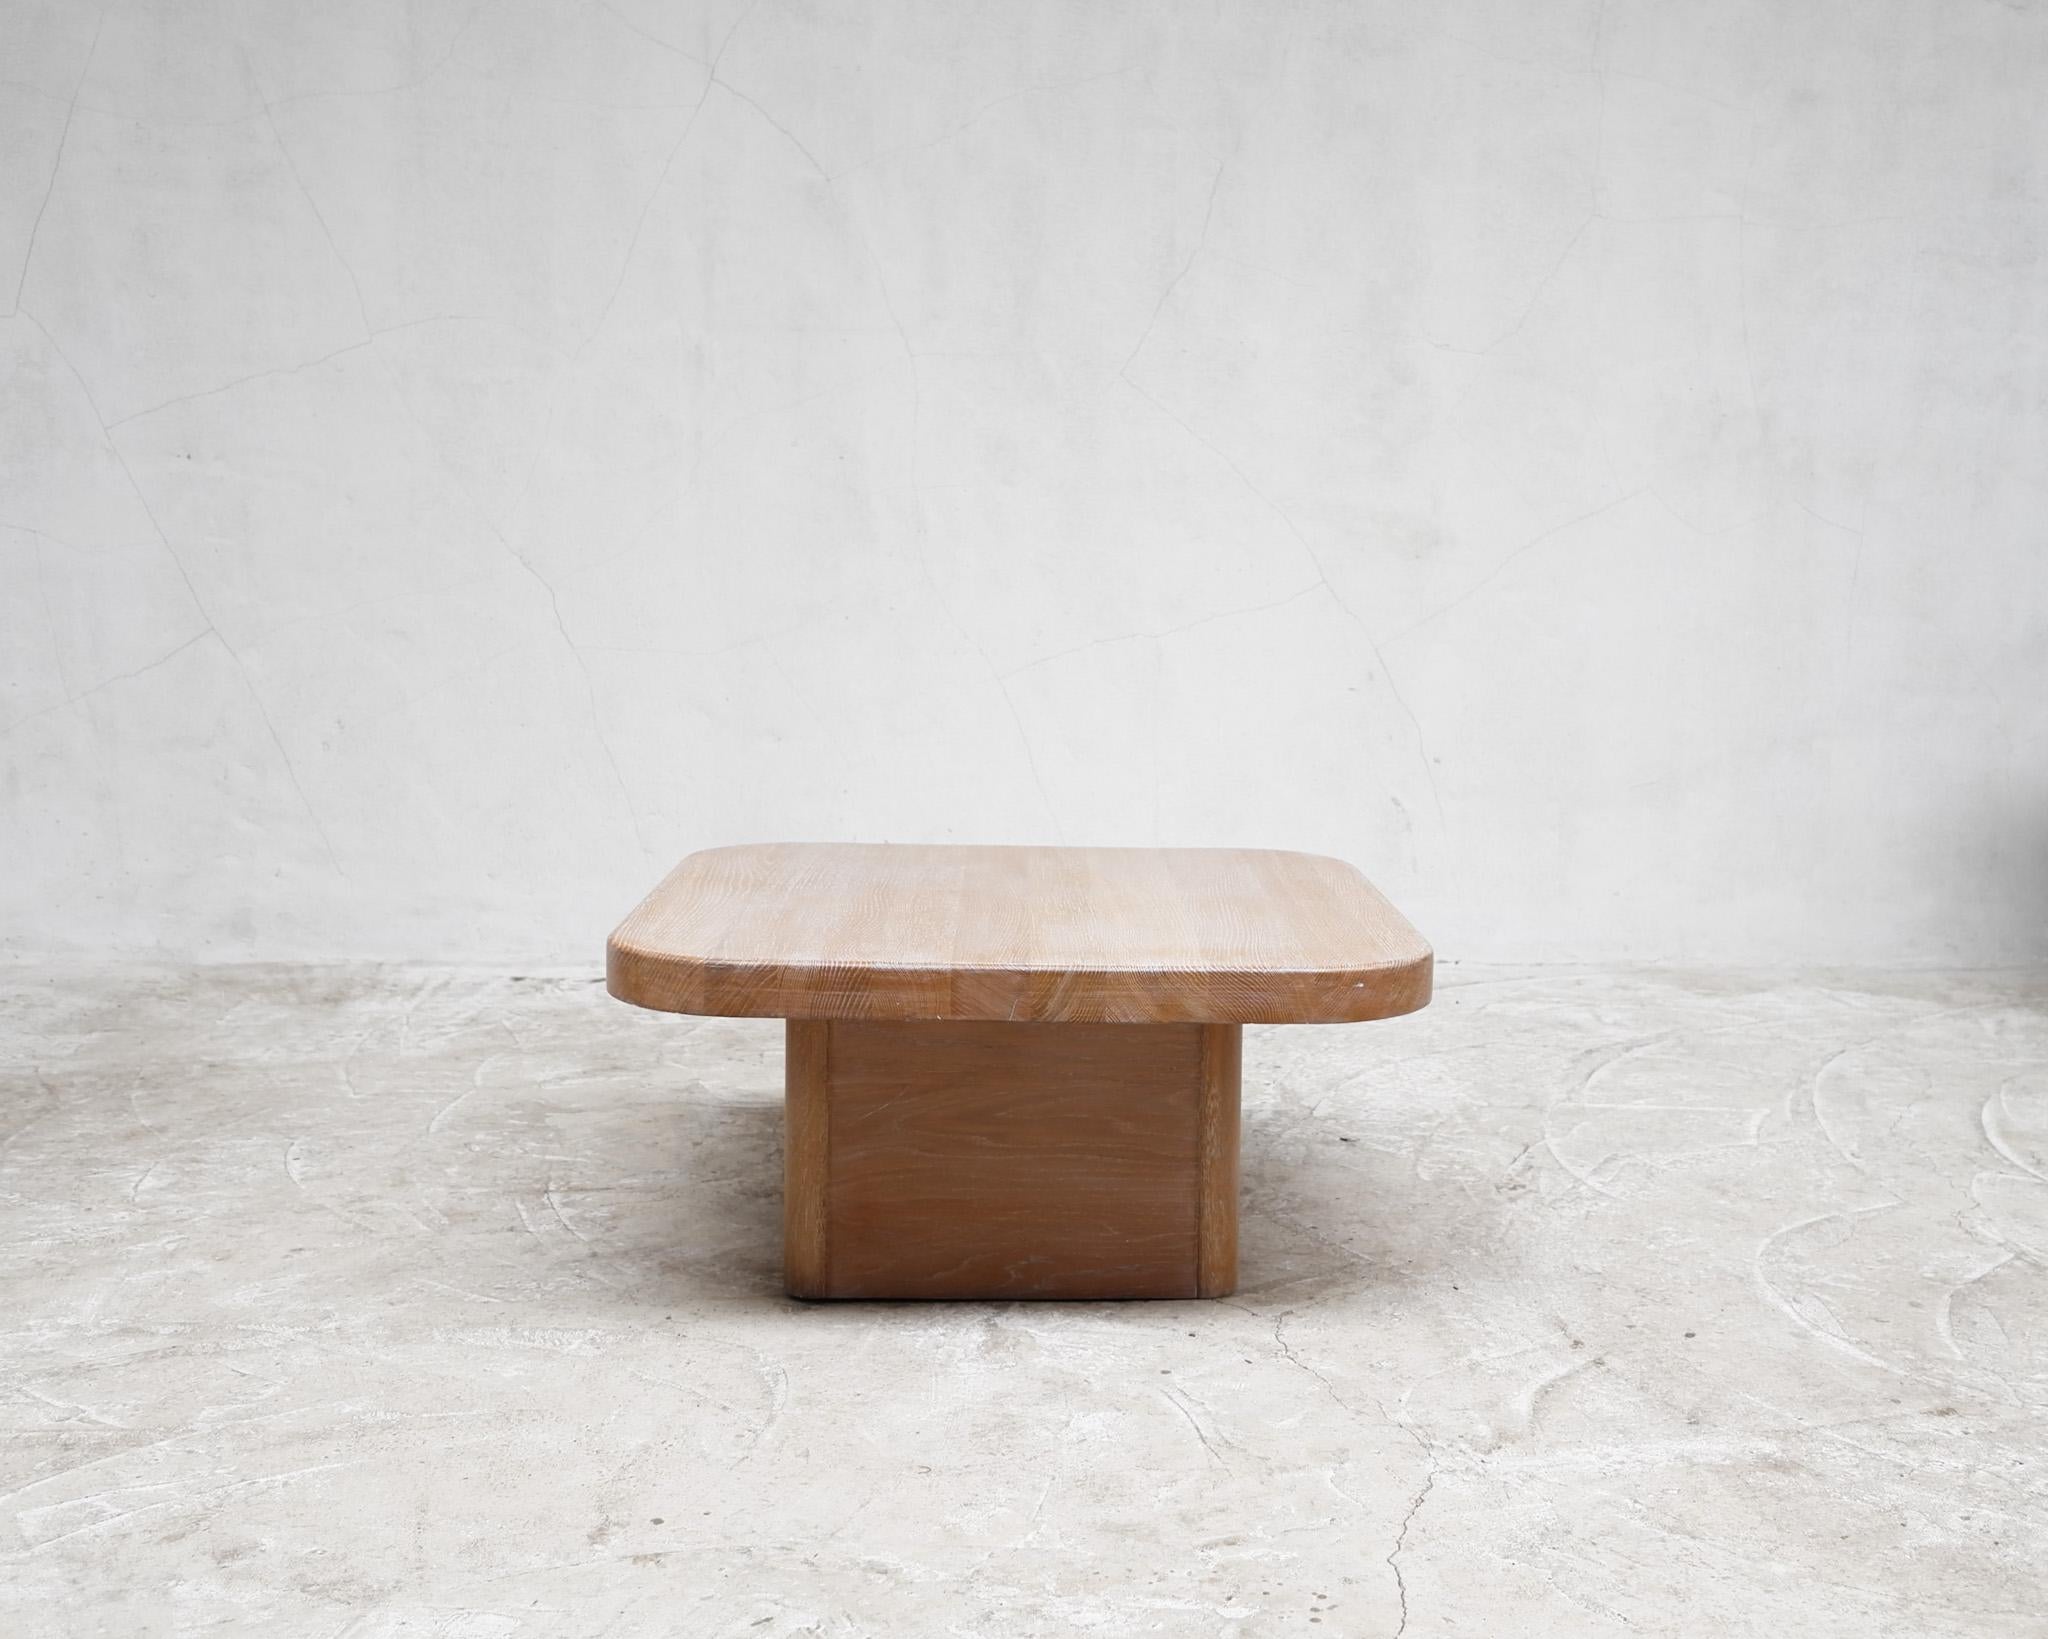 A C.1950s Spanish Limed oak coffee table in the modernist style.

Constructed in solid oak with good proportions.

-

We offer free shipping to the USA/Canada through Fedex with this item.